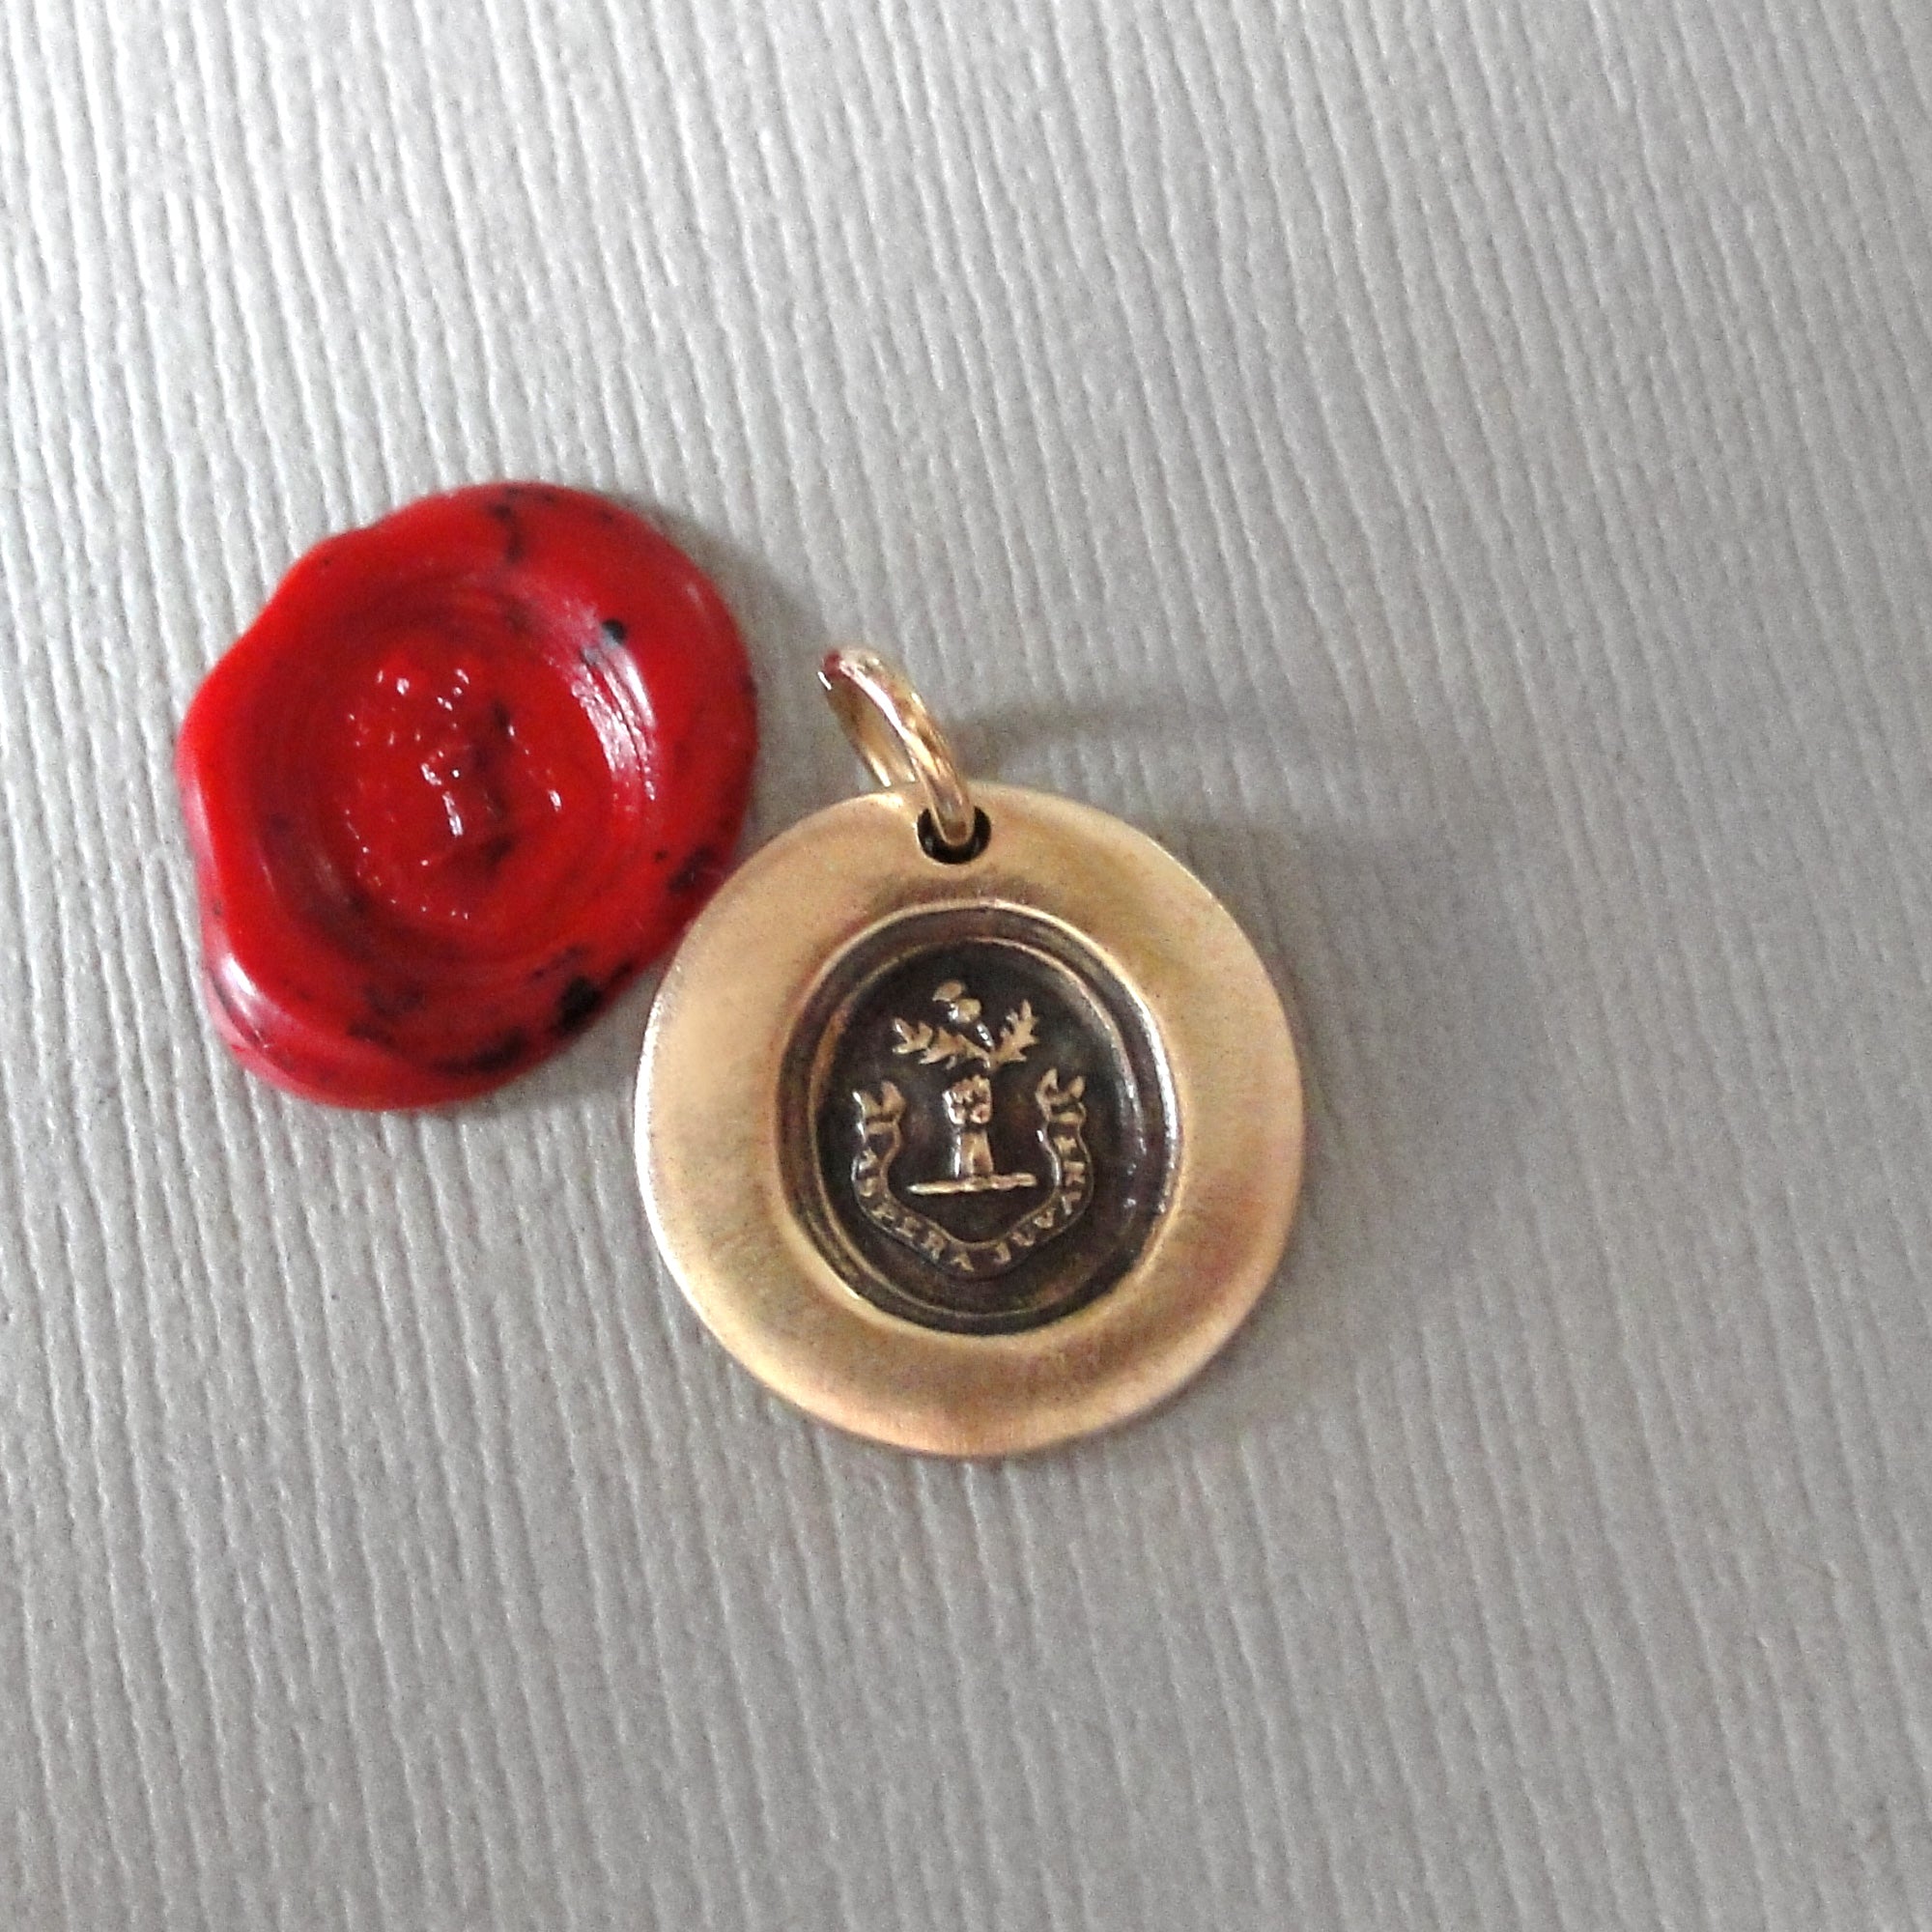 Thistle Latin Motto Antique Style Wax Seal Stamp